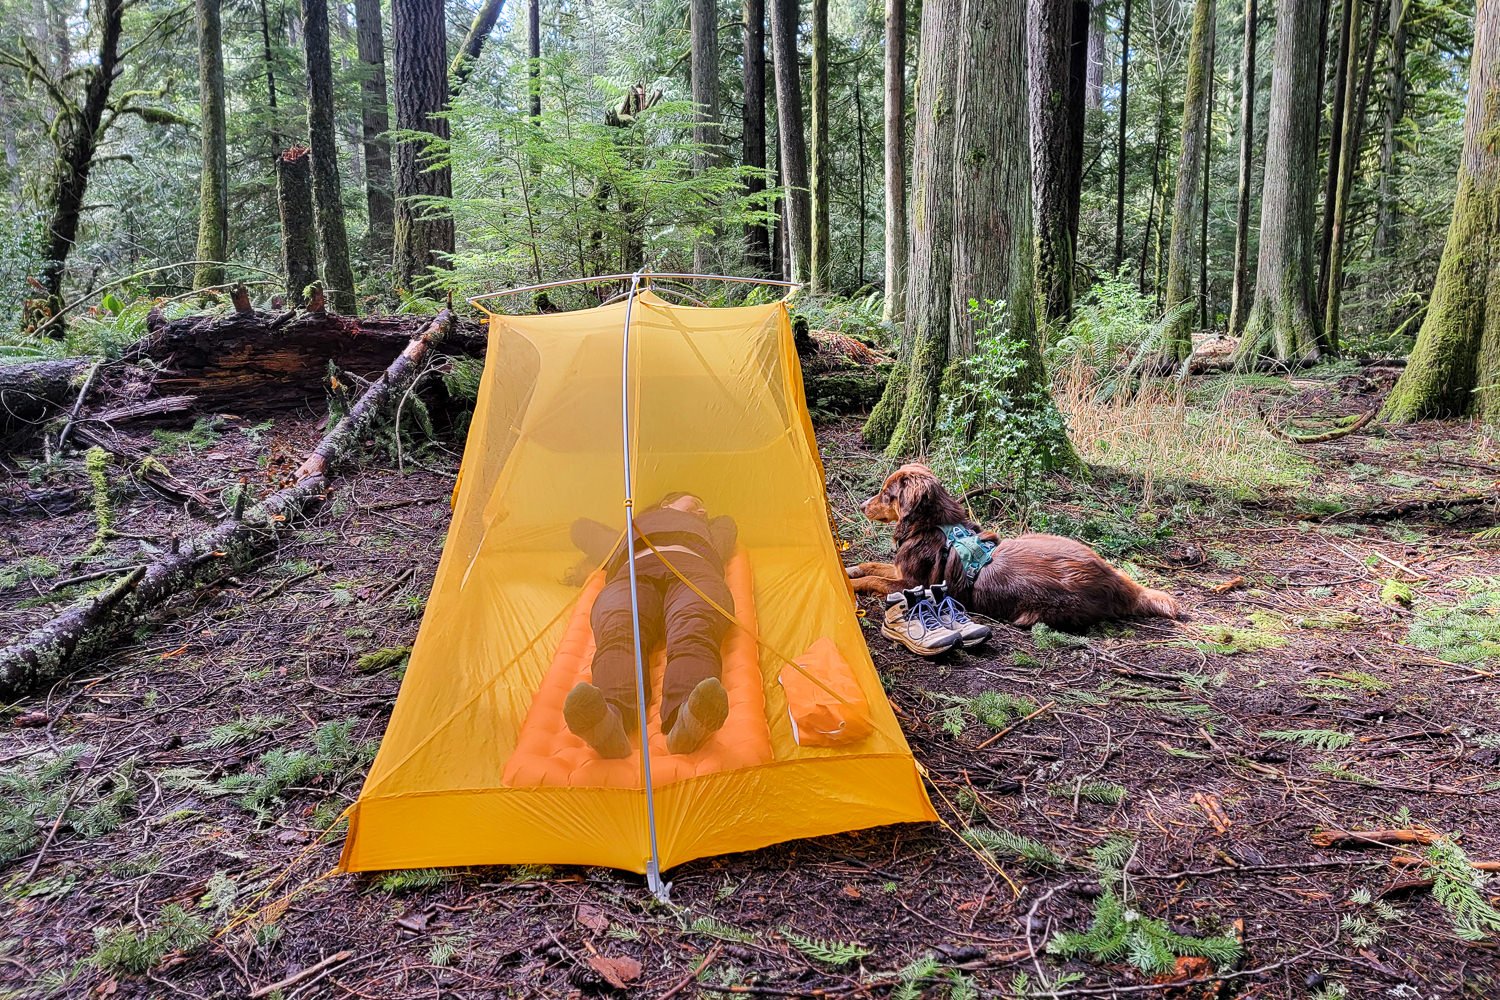 A hiker laying on the Big Agnes Zoom UL in a tent in a forest with a dog next to them